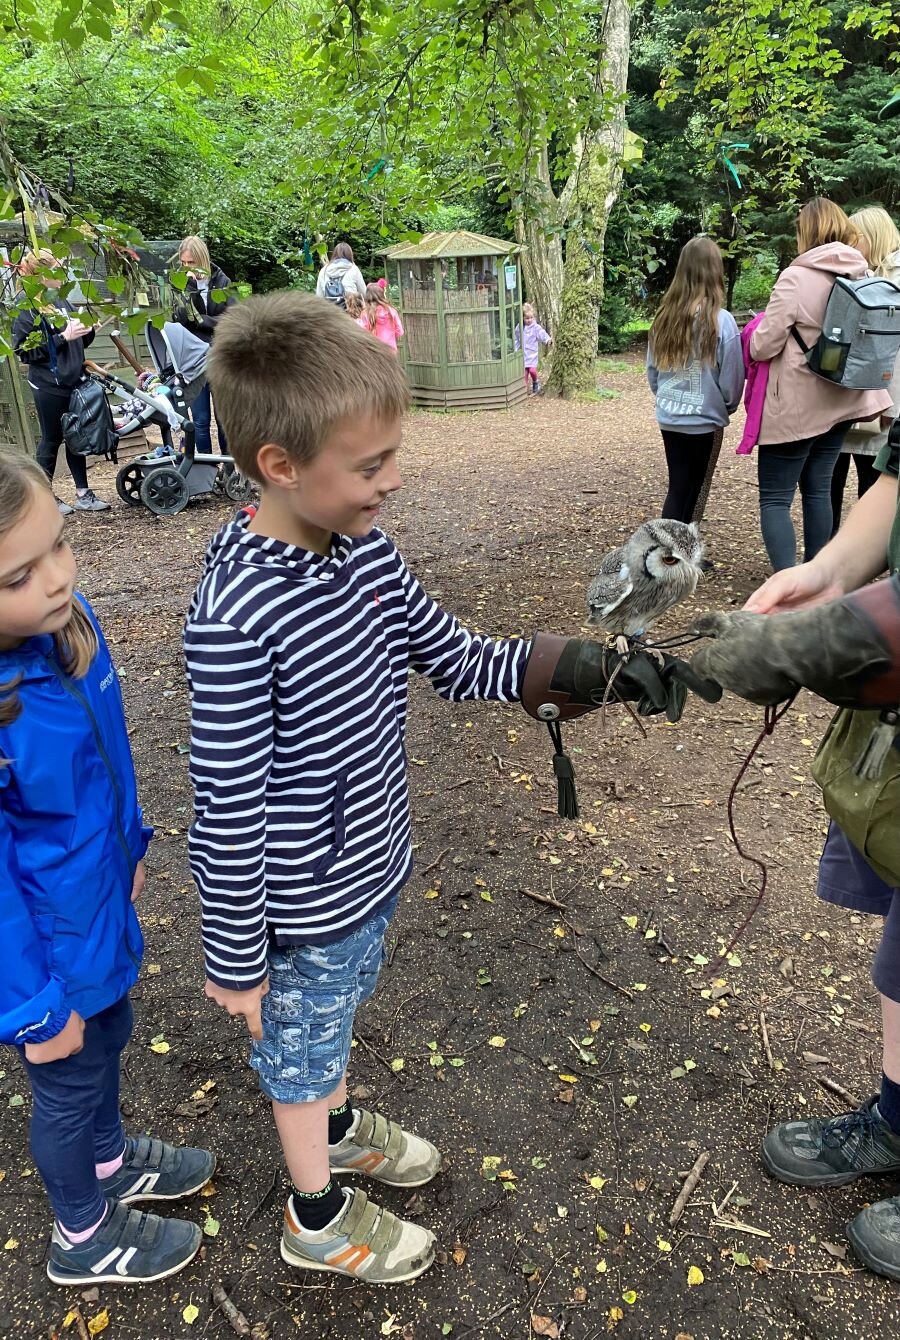 A Review of Willows Birds of Prey Centre, Kent